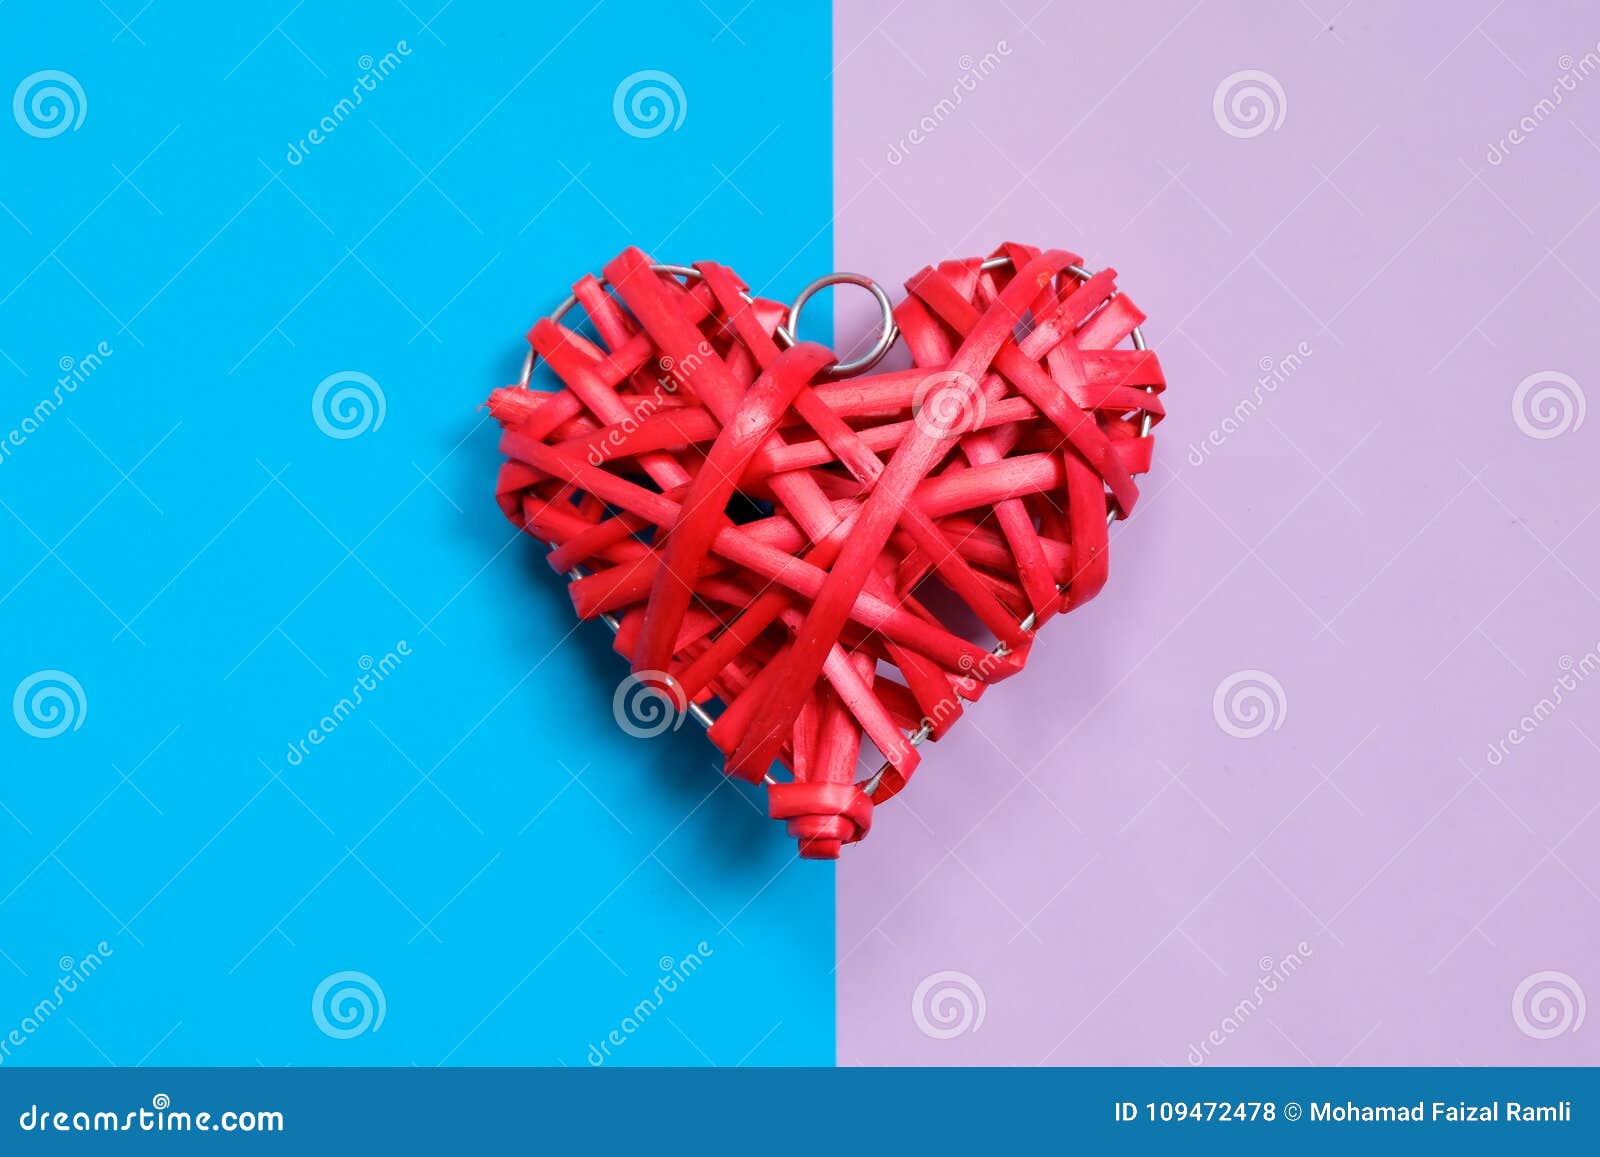 https://thumbs.dreamstime.com/z/top-view-red-wooden-handcraft-heart-symbol-blue-purple-background-two-tone-pastel-bakground-valentine-s-day-theme-duo-109472478.jpg